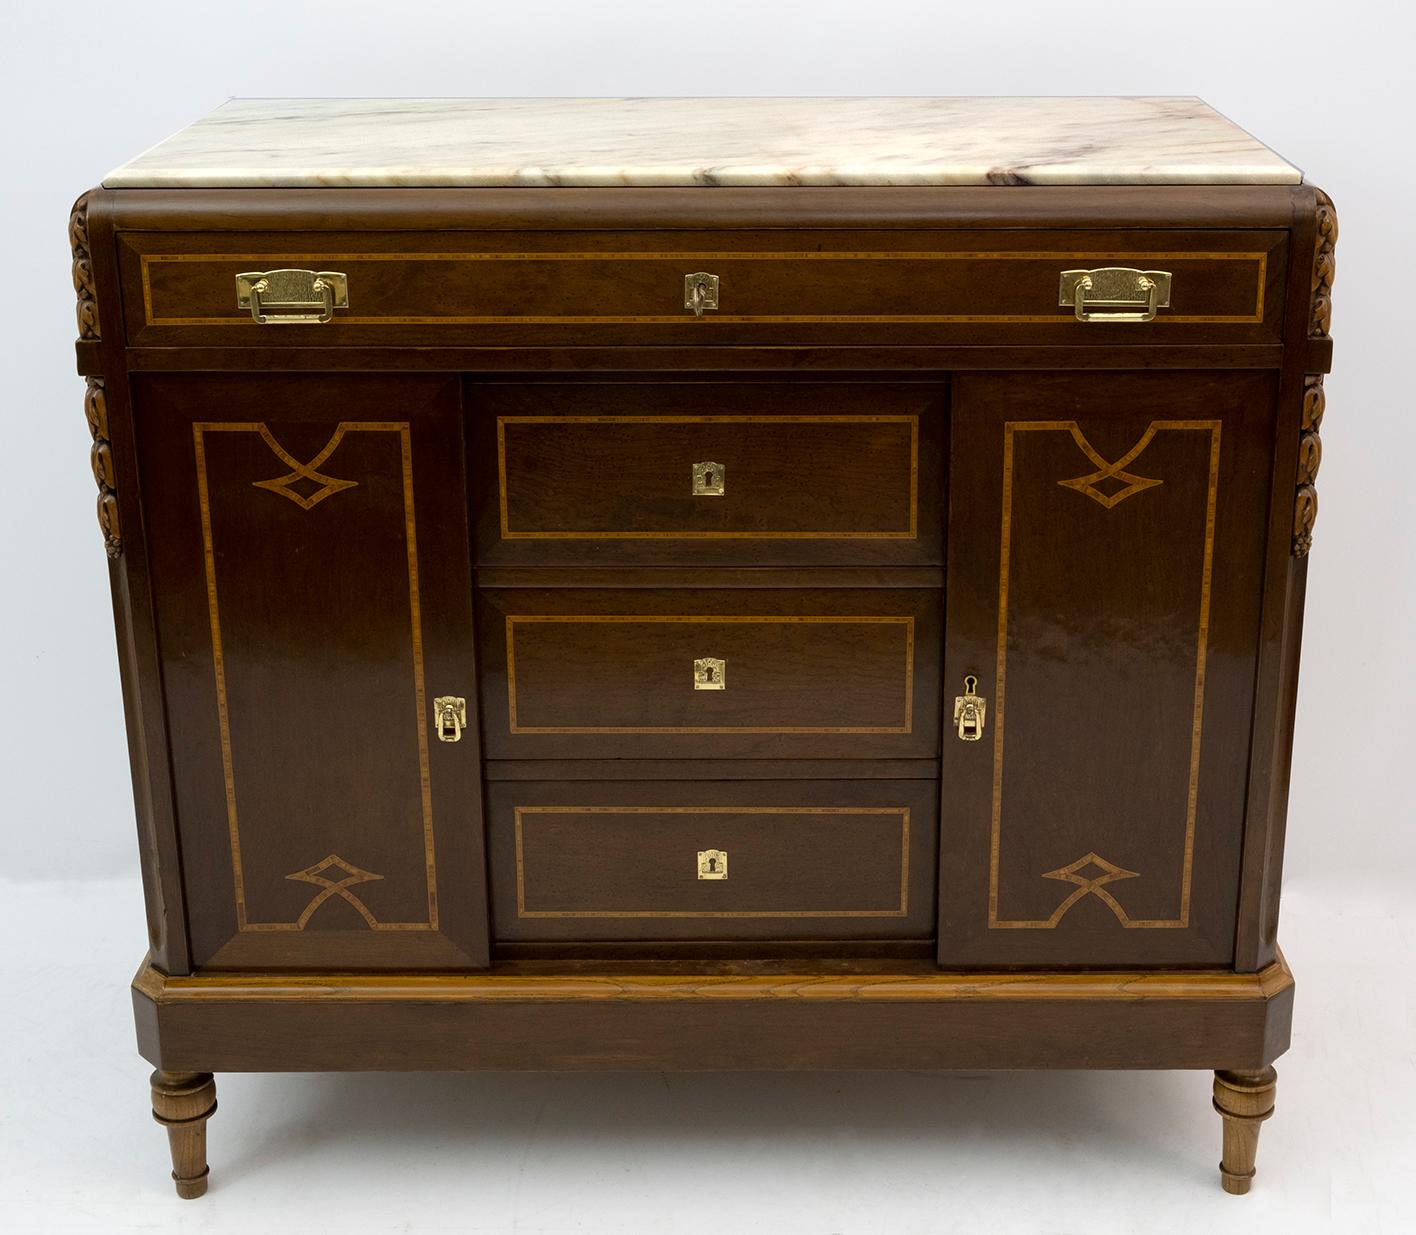 Chest of drawers in thuja briar, maple inlays and Portuguese pink marble top, 1920s Italian production. The dresser has been restored and polished with shellac.
Also available the pair of bedside tables
The bedside tables measure 126 cm high with